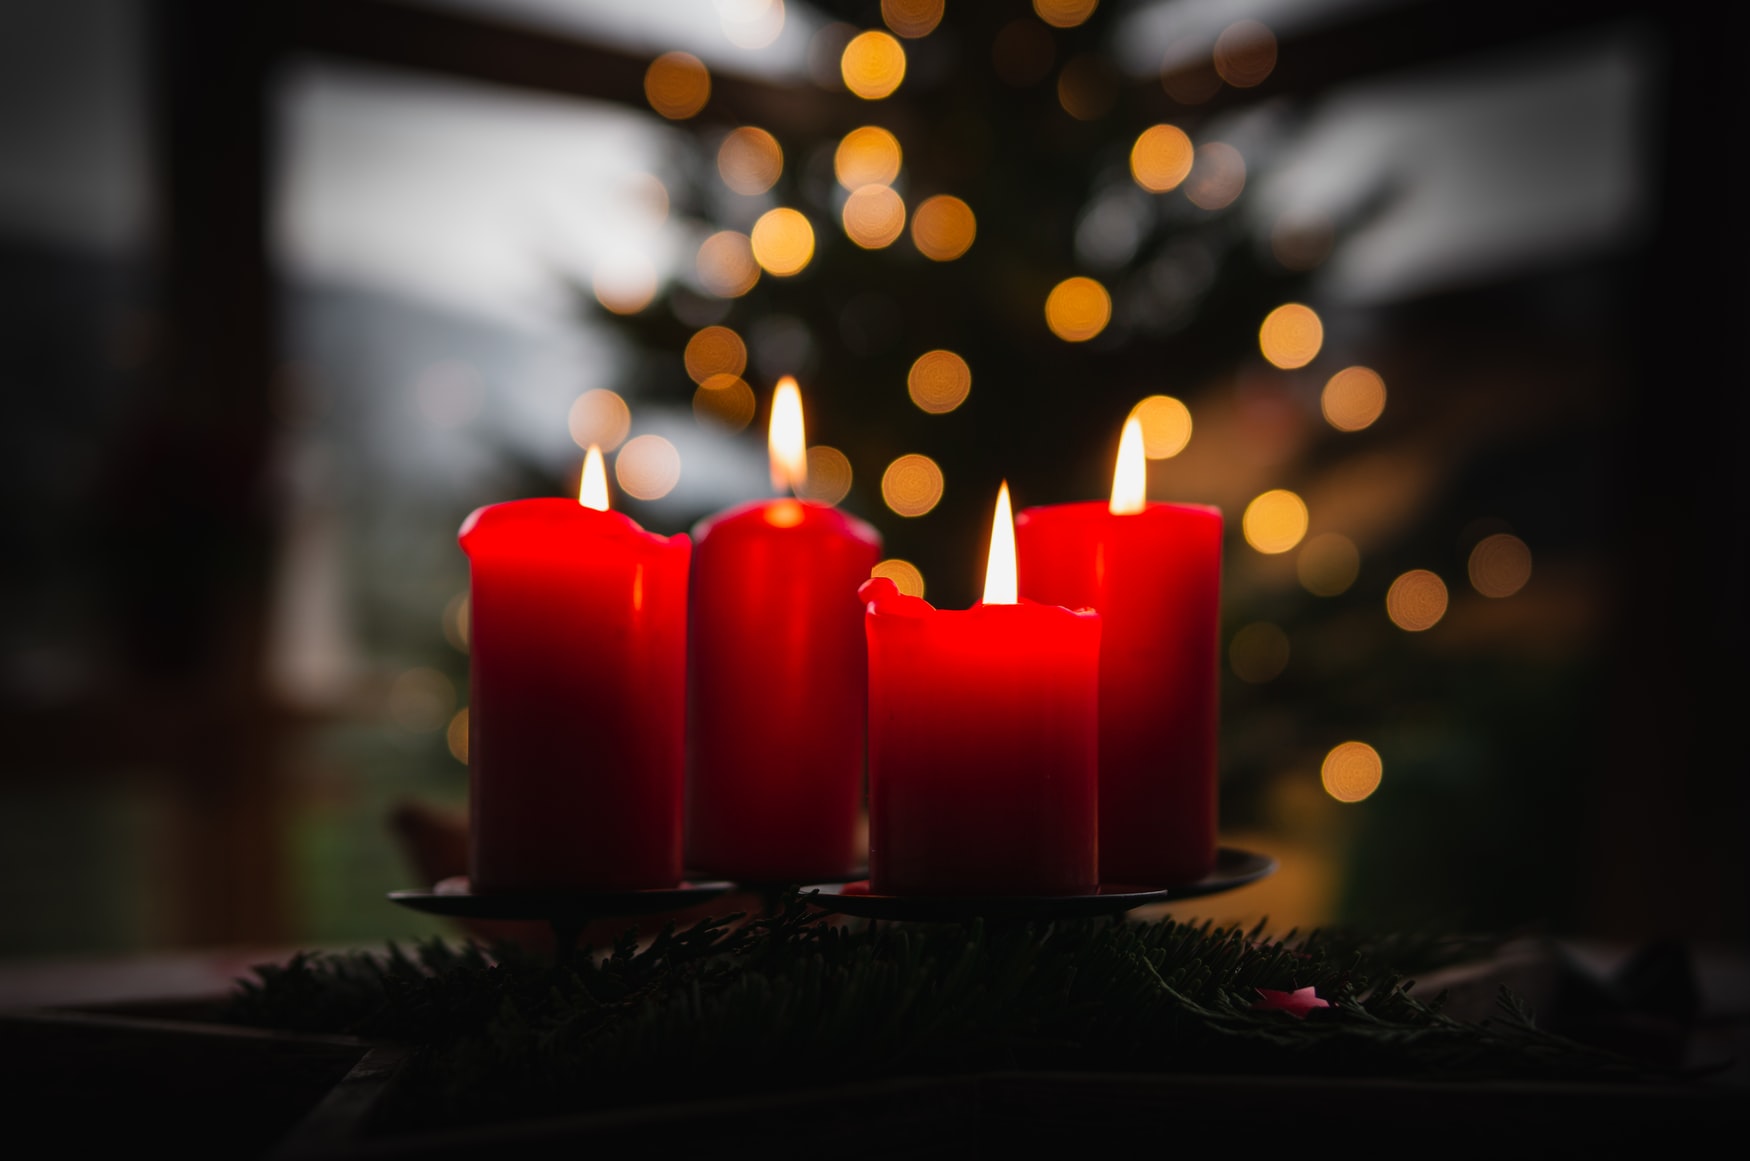 an image of four red candles lit on a table in a dim room with a christmas tree in the background adding sparkle inside